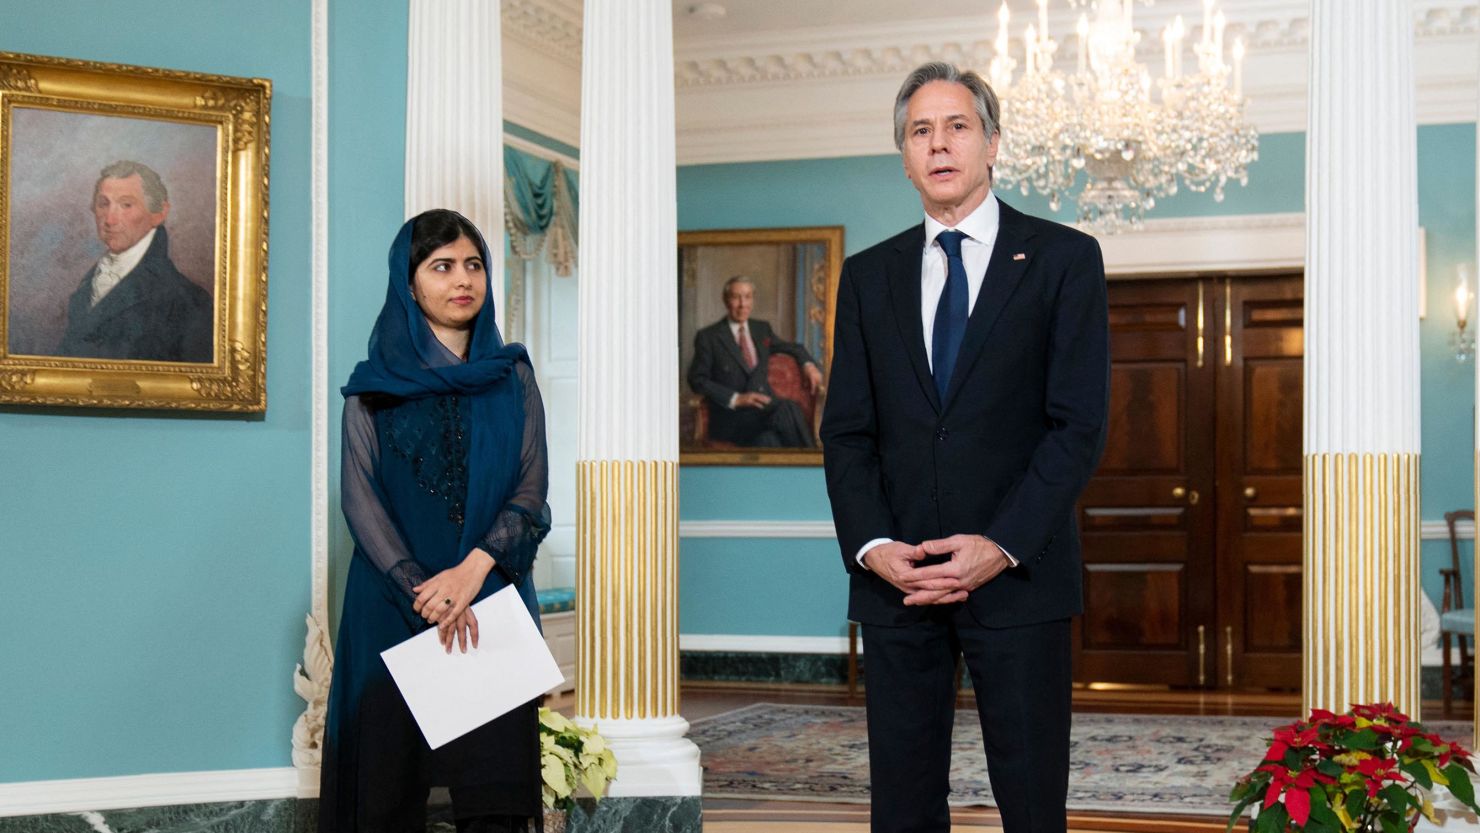 Secretary of State Antony Blinken welcomes Malala Yousafzai, Pakistani activist for female education and a Nobel Peace Prize laureate, at the State Department in Washington DC on December 6, 2021. 